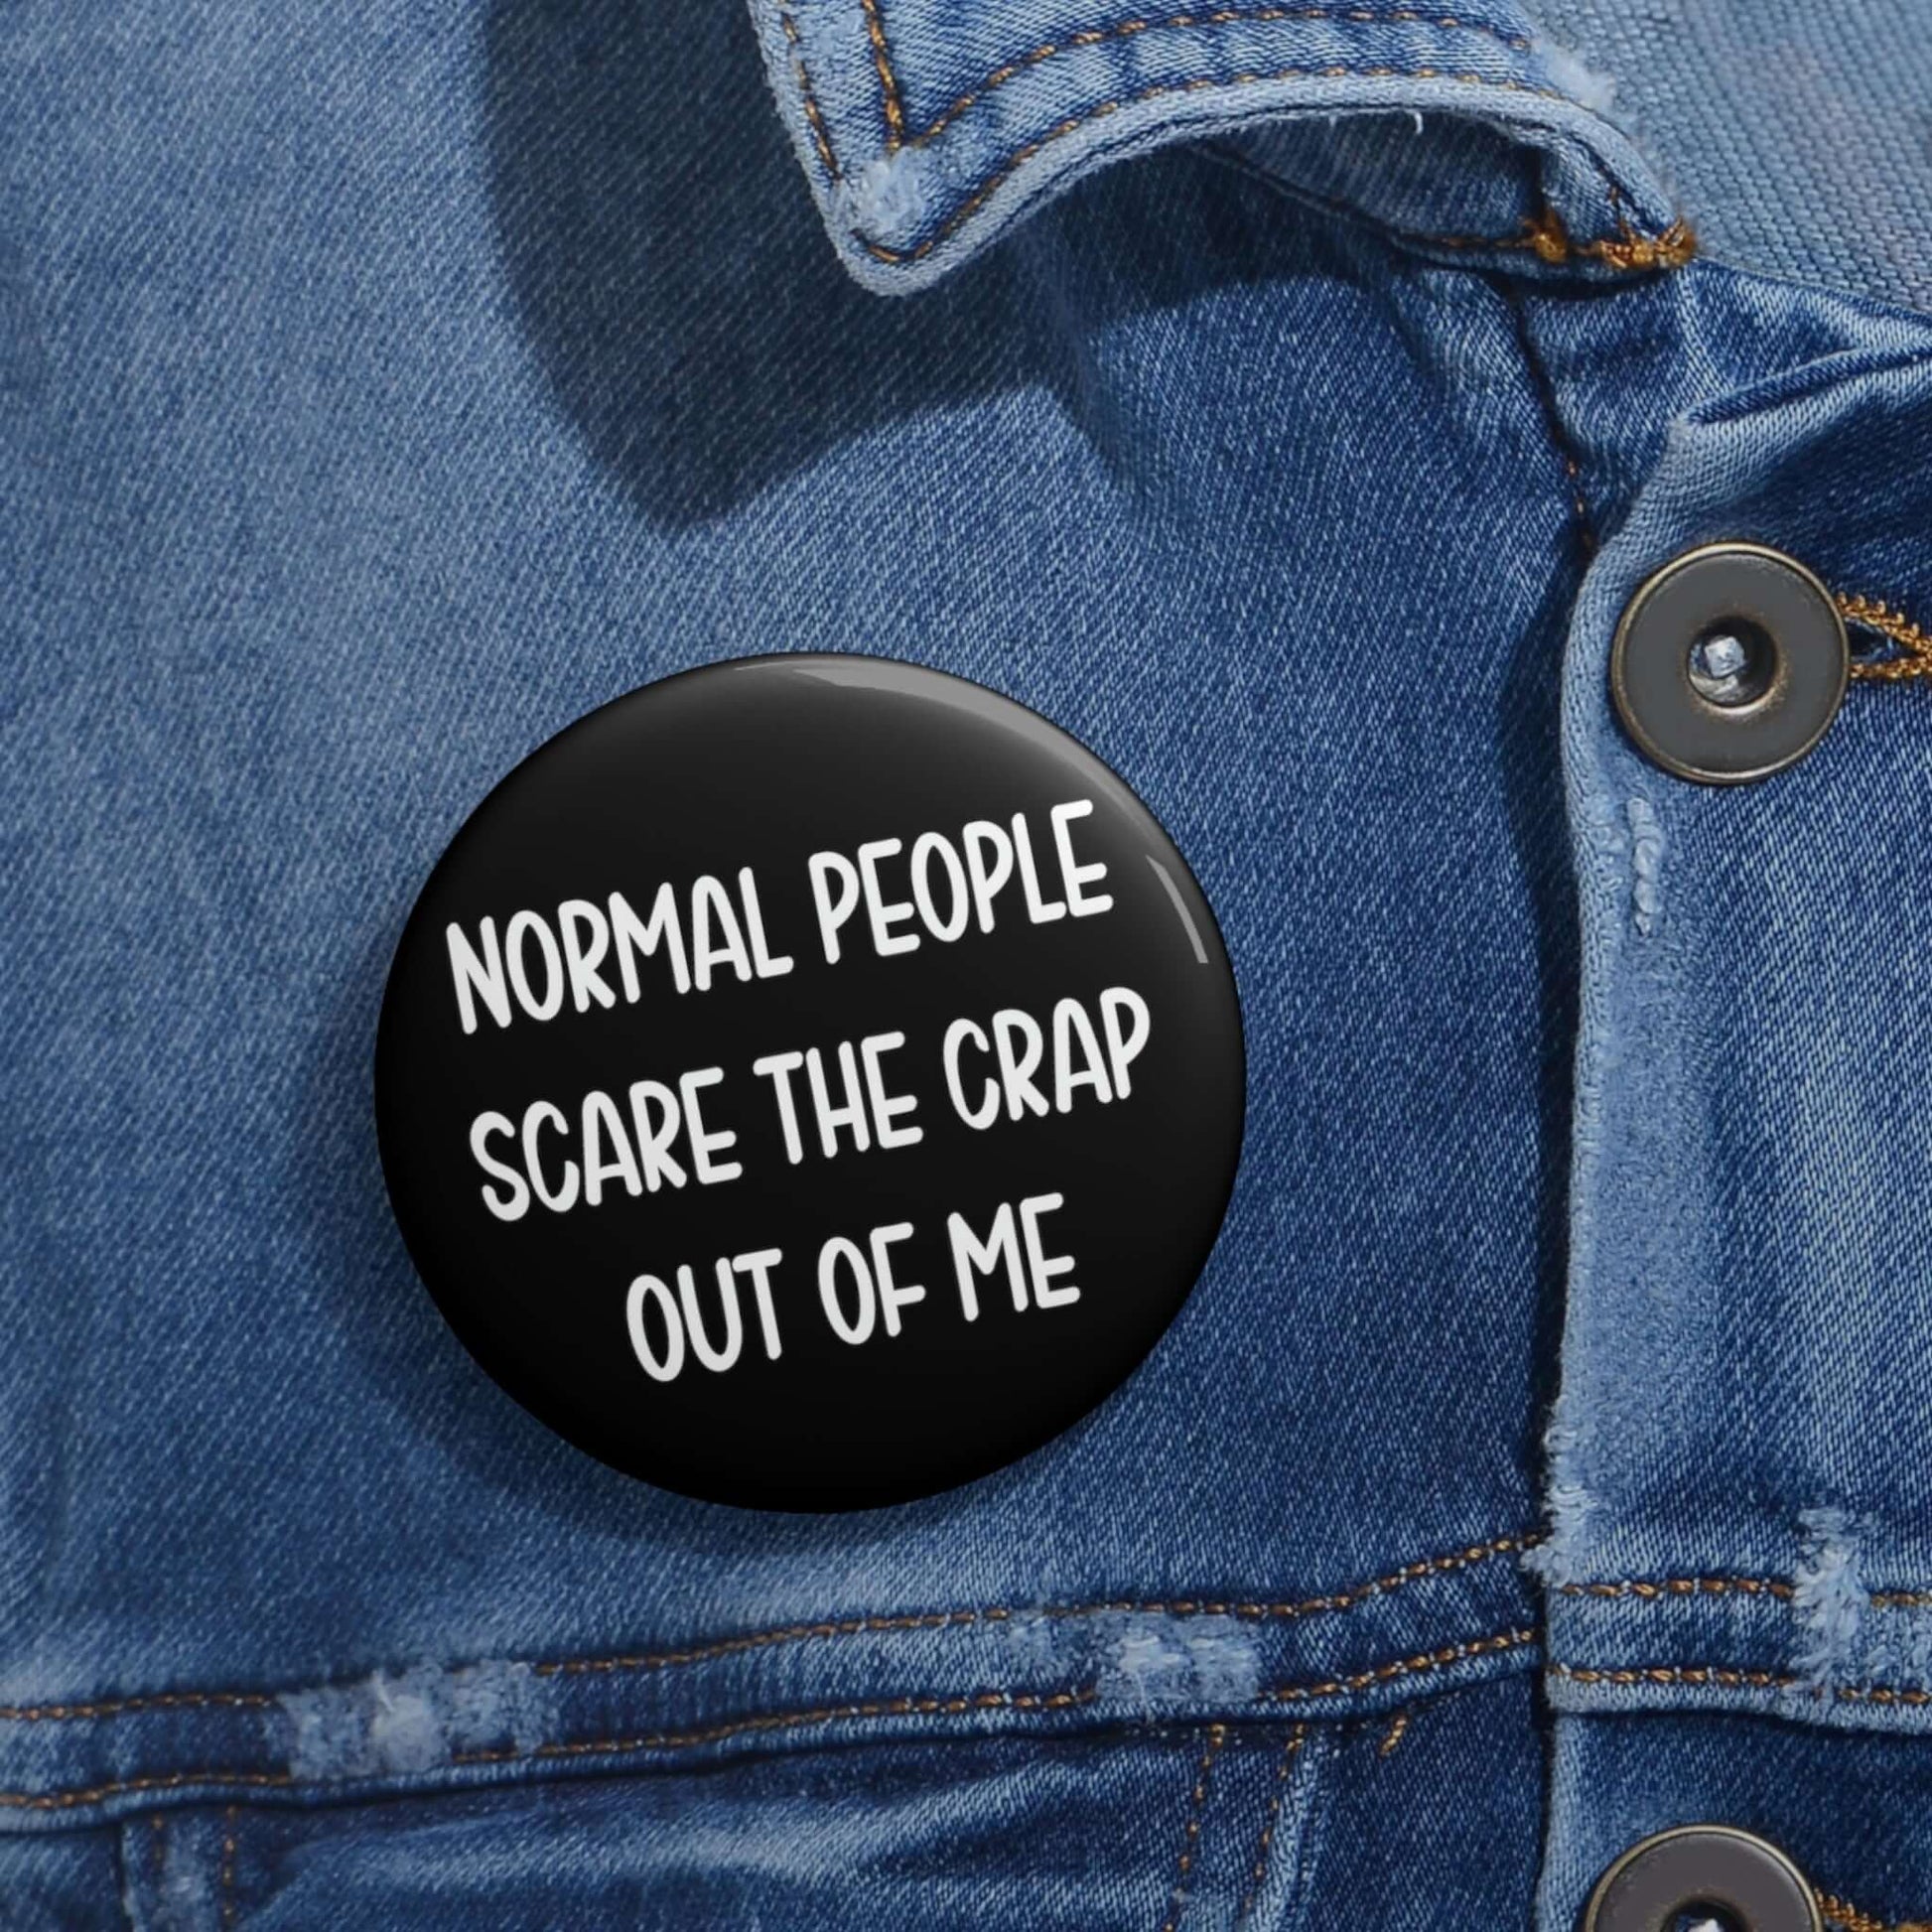 Pin-back button that says Normal people scare the crap out of me.